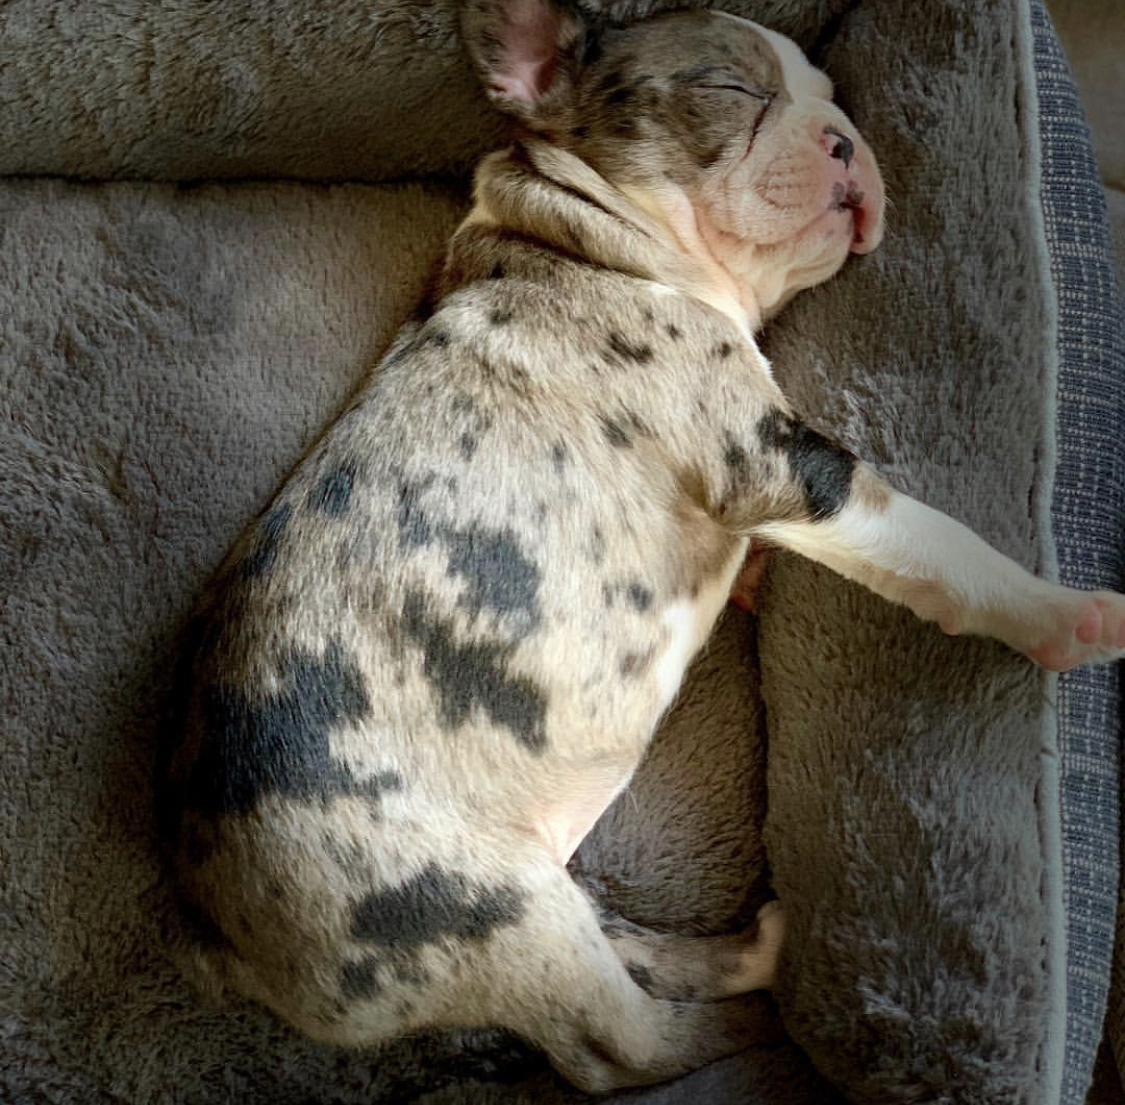 A Frenchton puppy sleeping soundly on its bed